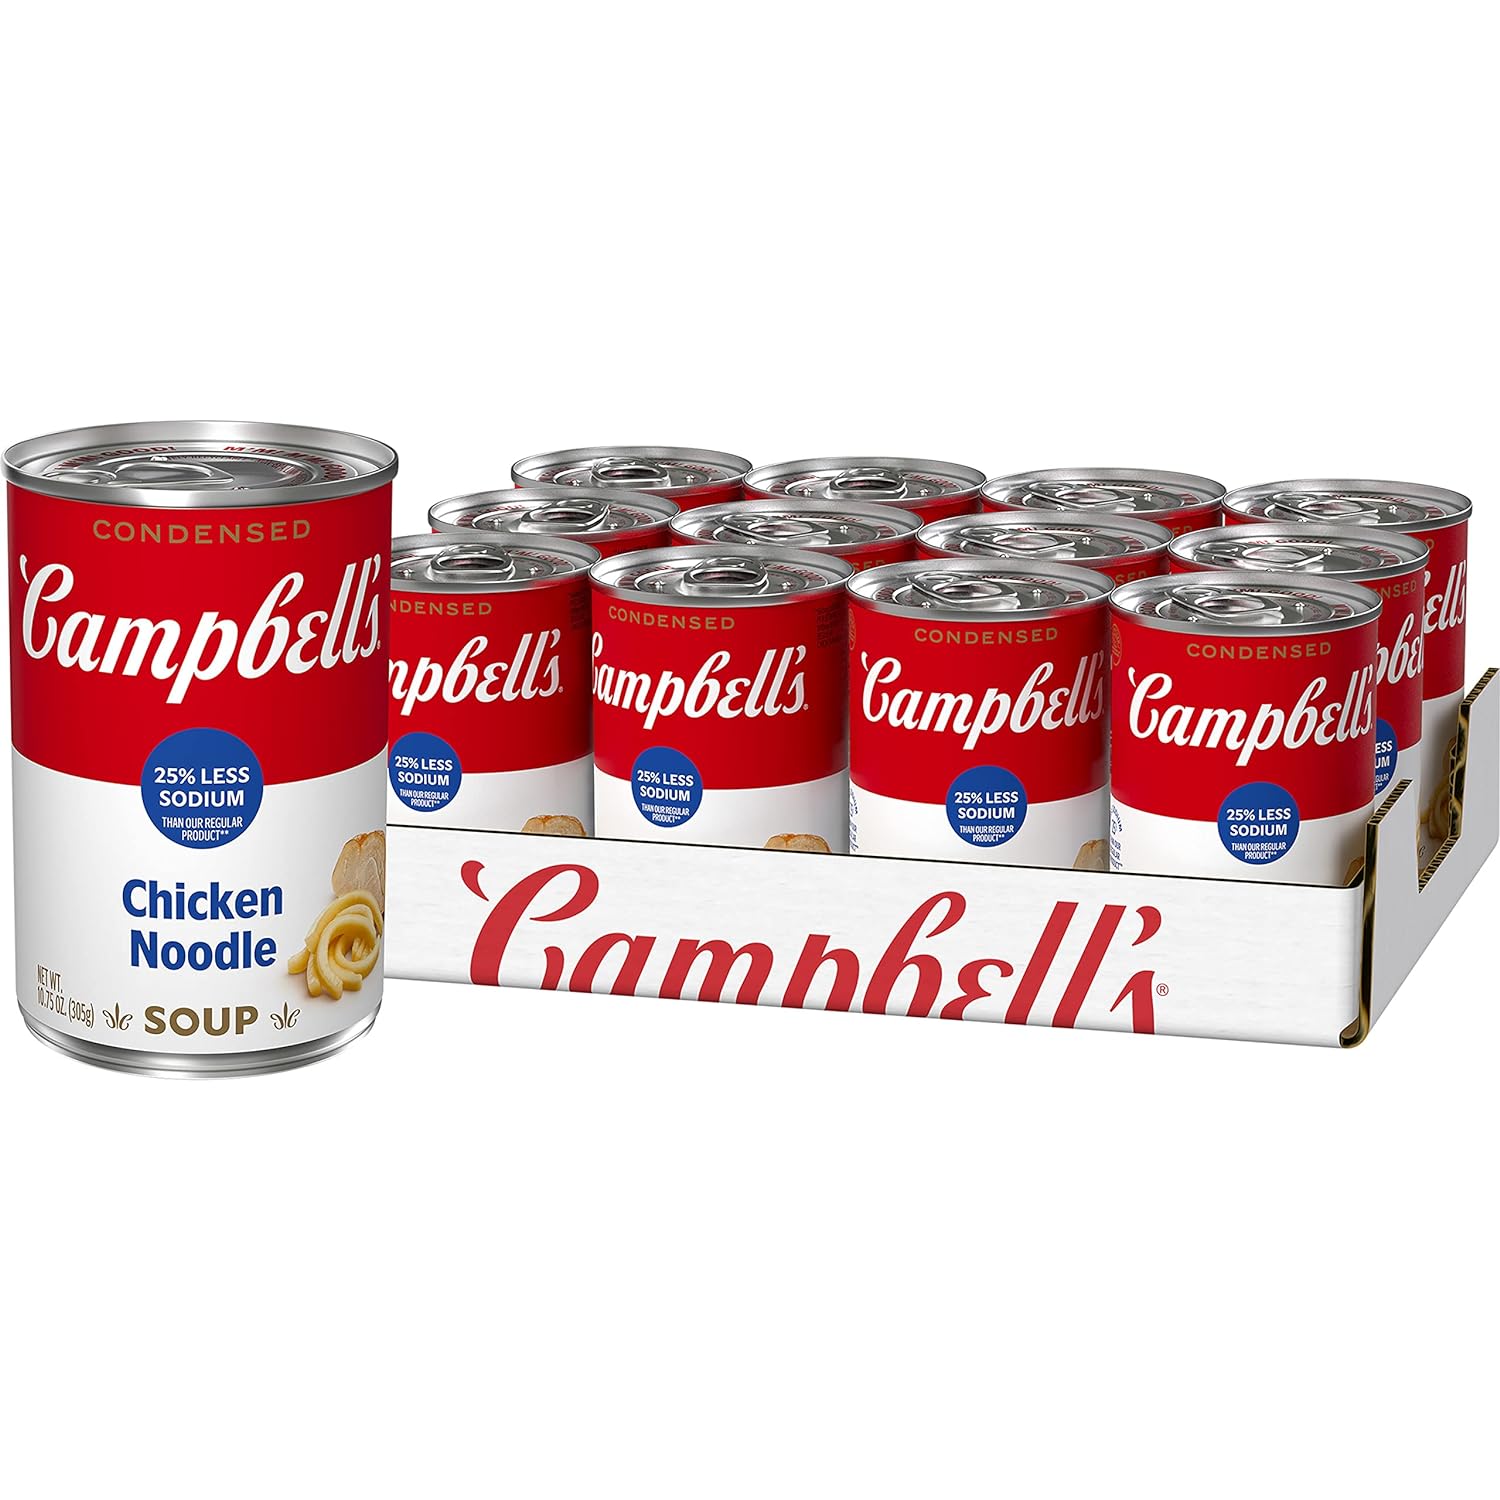 Campbell's Condensed 25% Less Sodium Chicken Noodle Soup-Pack of 12, 10.75 oz Cans-$11.01 AC-Amazon